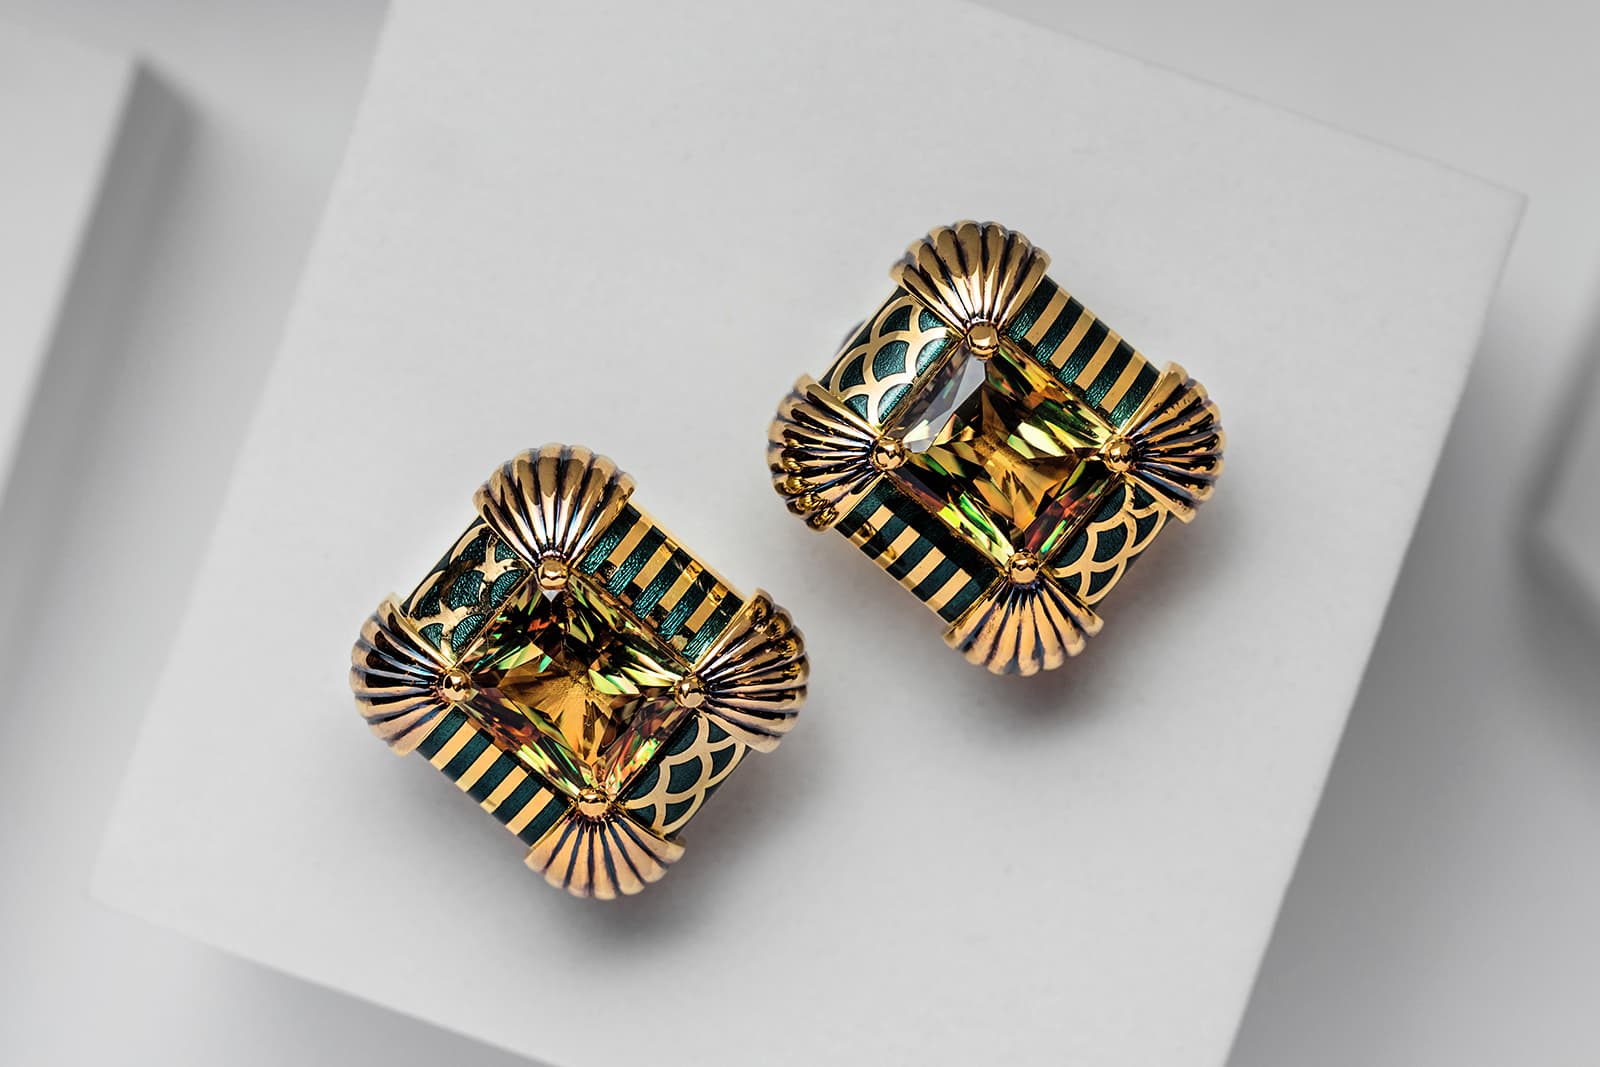 Izmestiev Diamonds ‘The Sultan’ earrings in gold and enamel with sultanite – a rare colour-change gemstone - from the Japanese Garden Collection